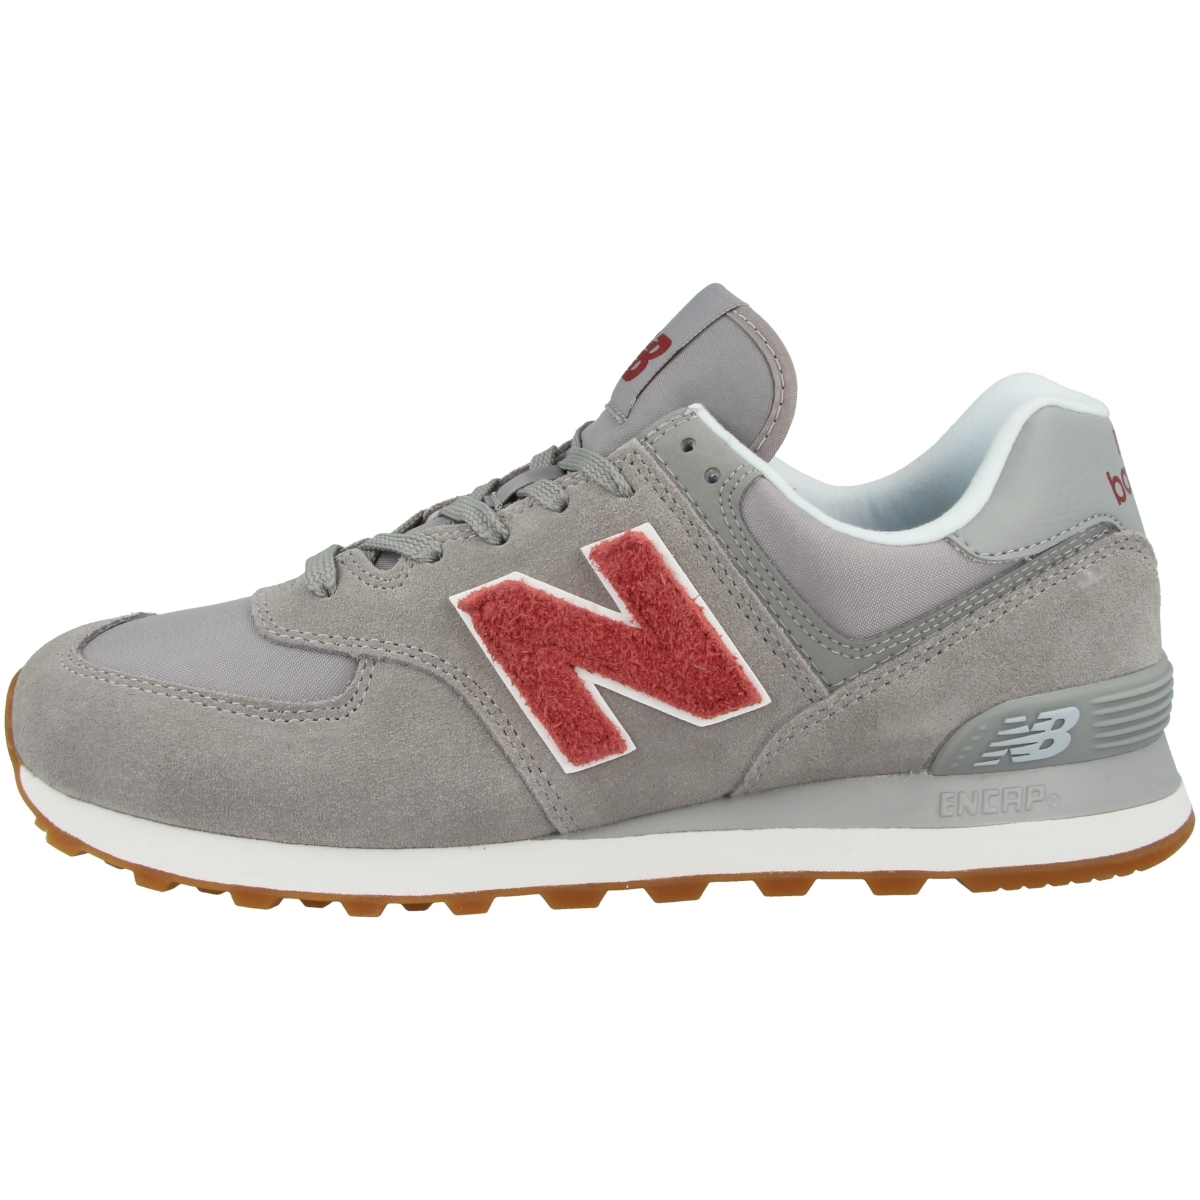 New Balance ML 574 Sc Men's Shoes Casual Trainers Lace up Trainers ...